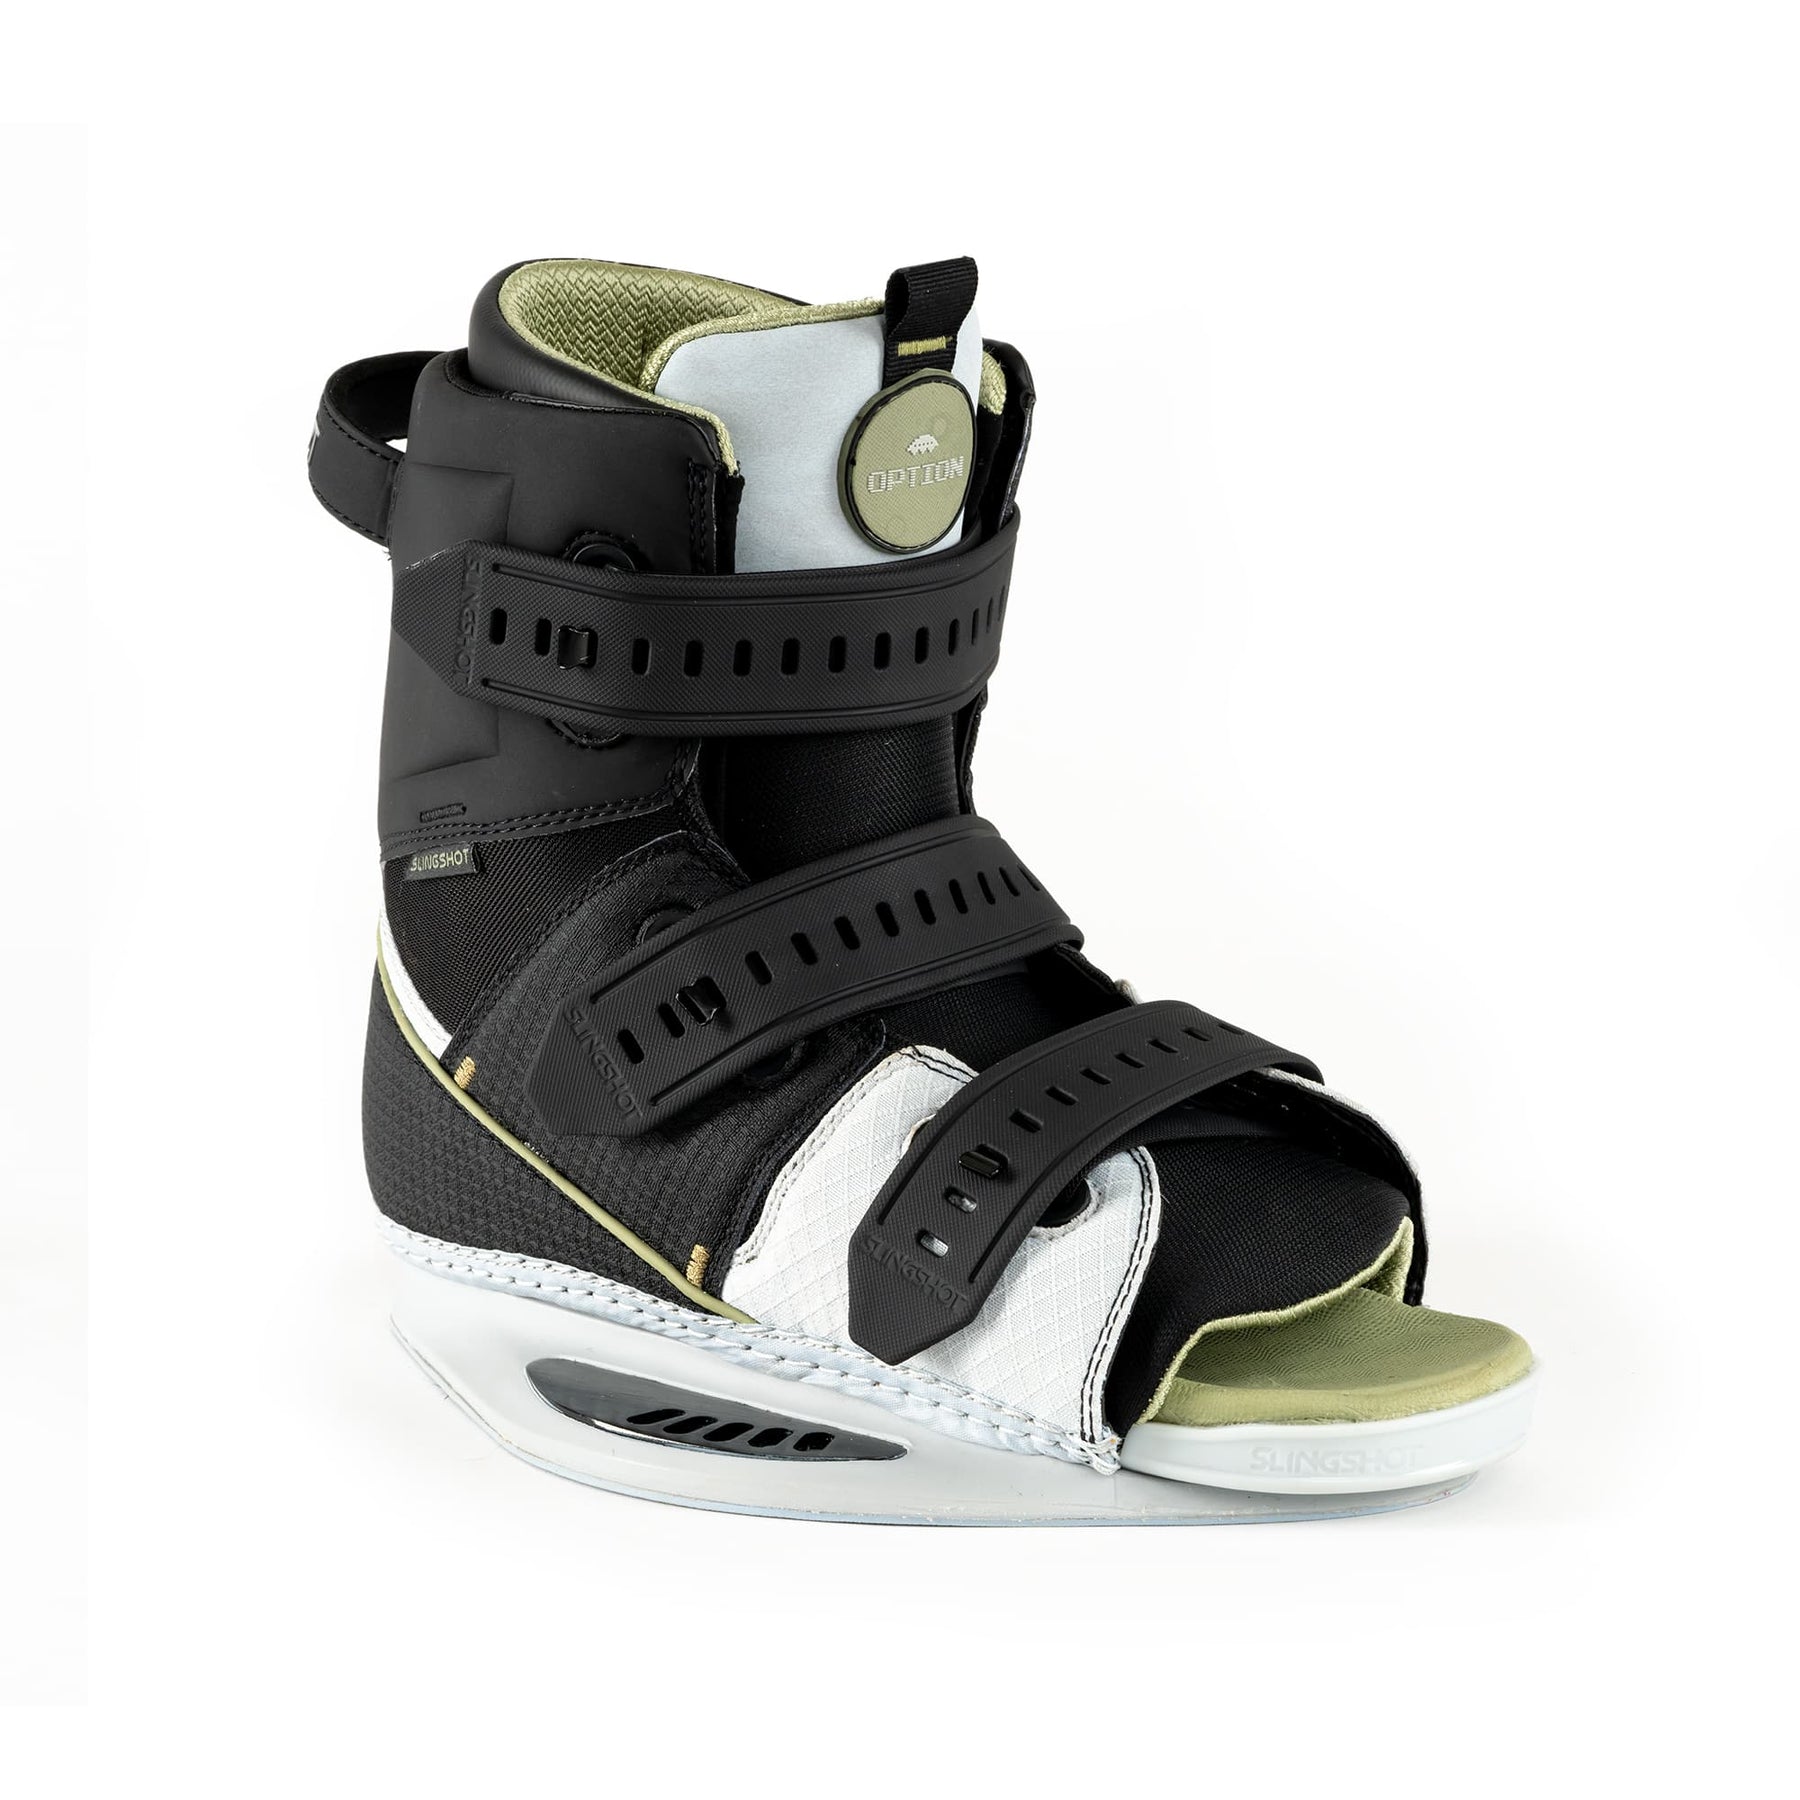 2023 OPTION WAKEBOARD BOOTS